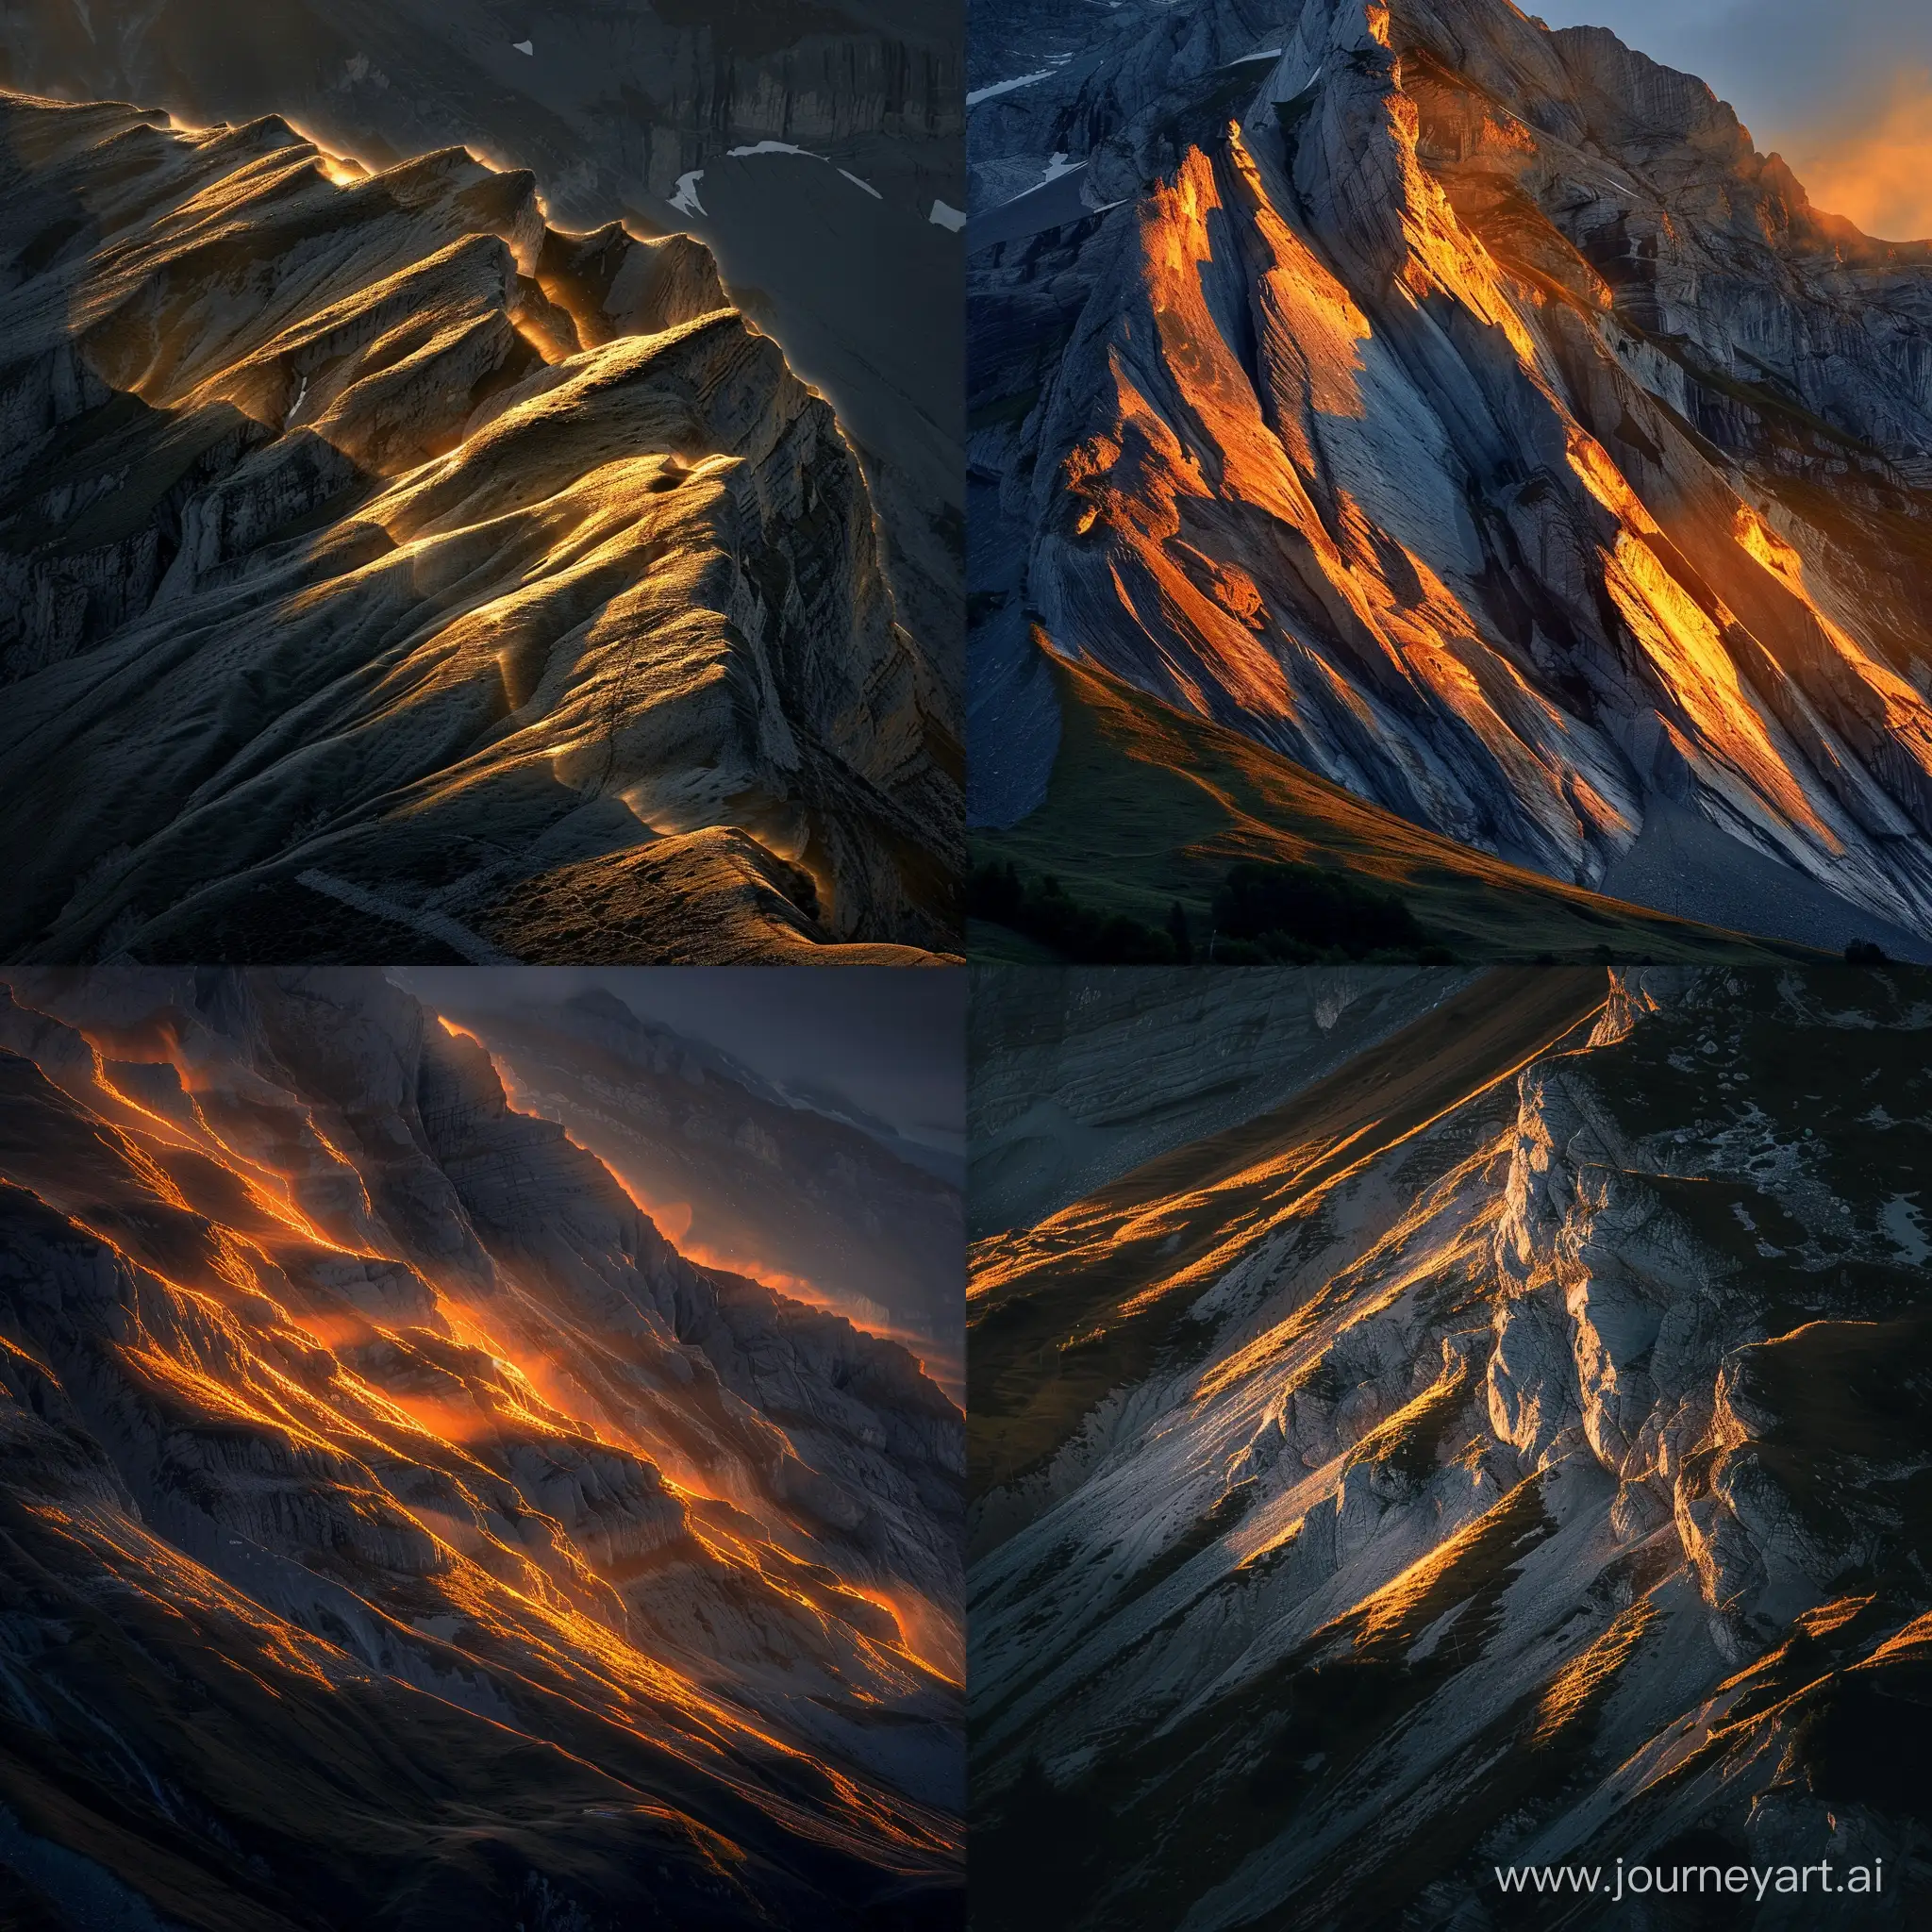 Generate an image of a mountain in Switzerland during the golden hour with unique and cool lighting effects. The play of light and shadows creates a visually stunning composition, highlighting the natural beauty of the mountainous terrain.